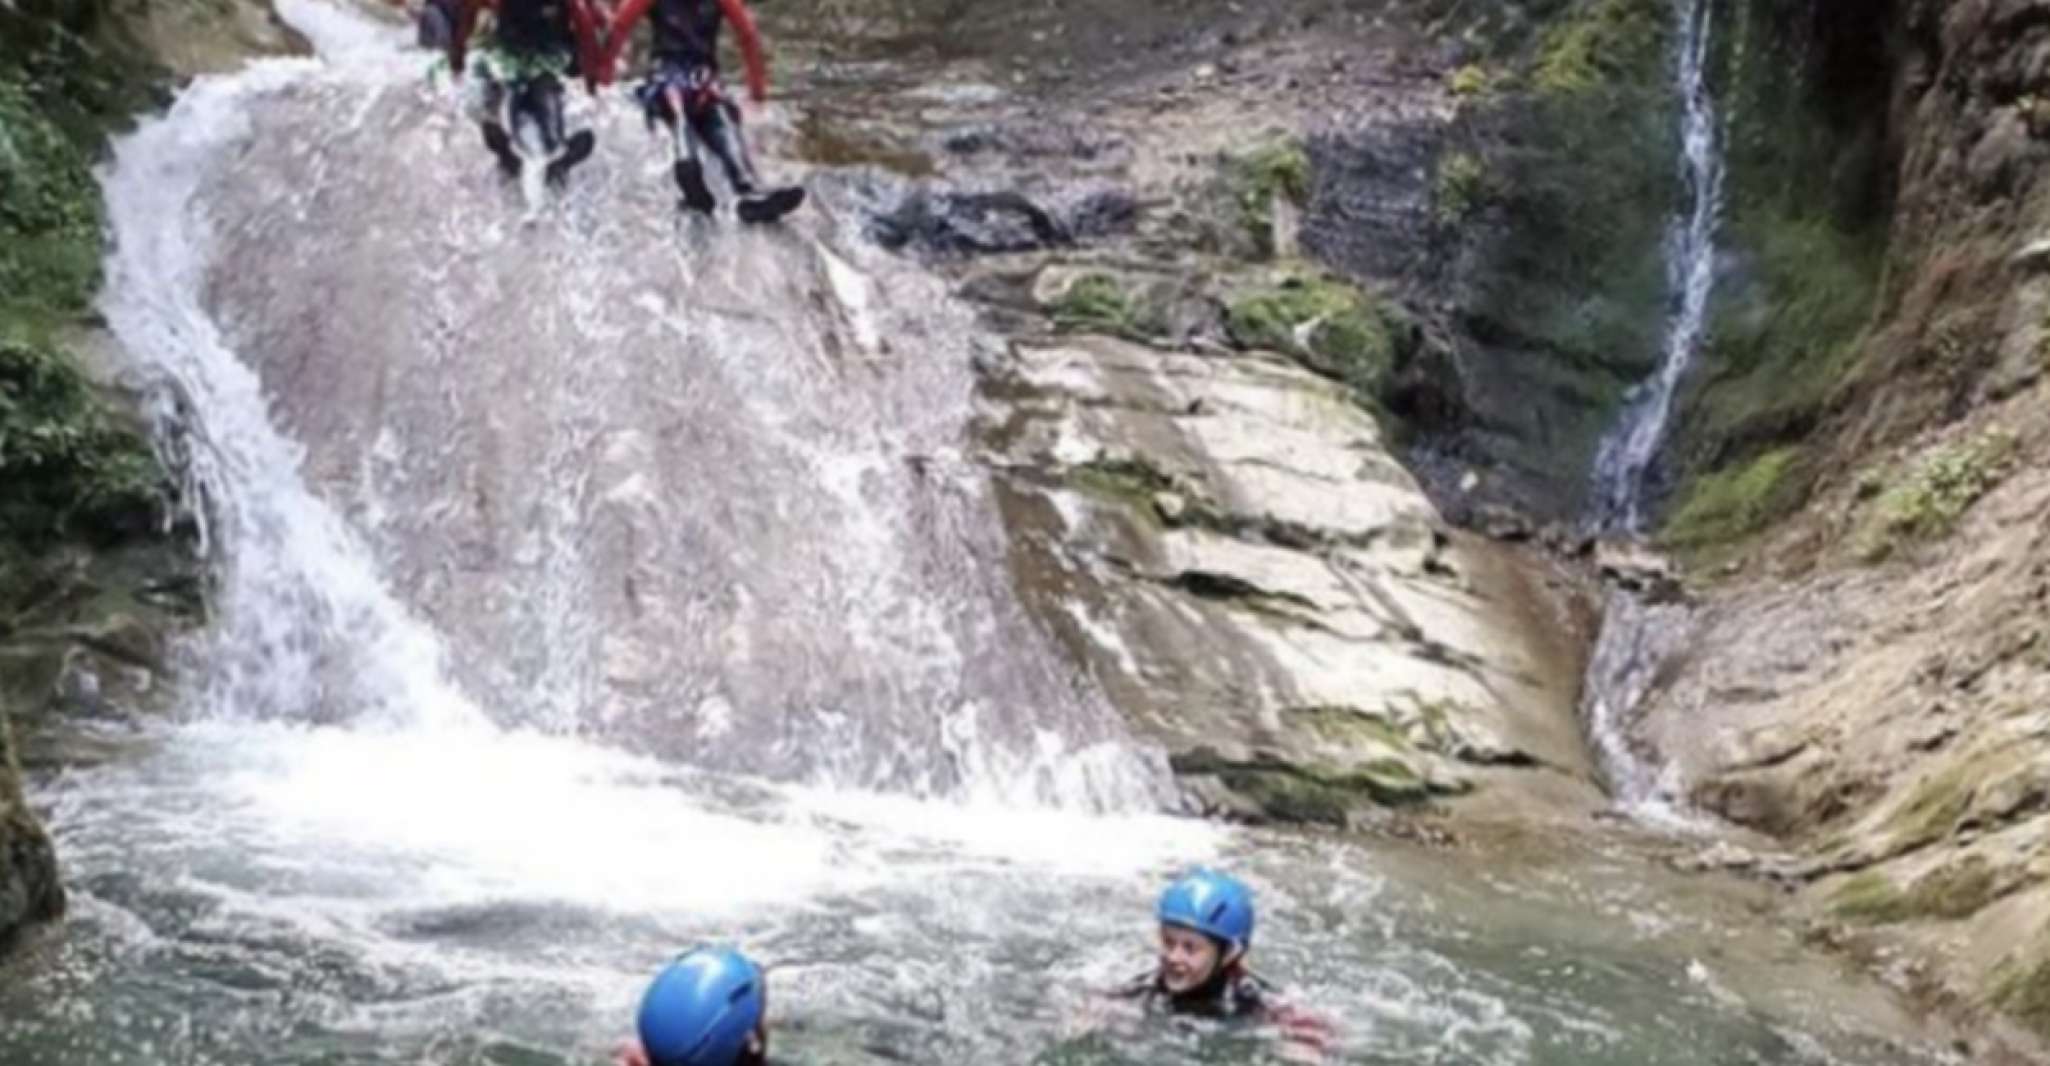 Canyoning tour - Ecouges express in Vercors - Grenoble - Housity